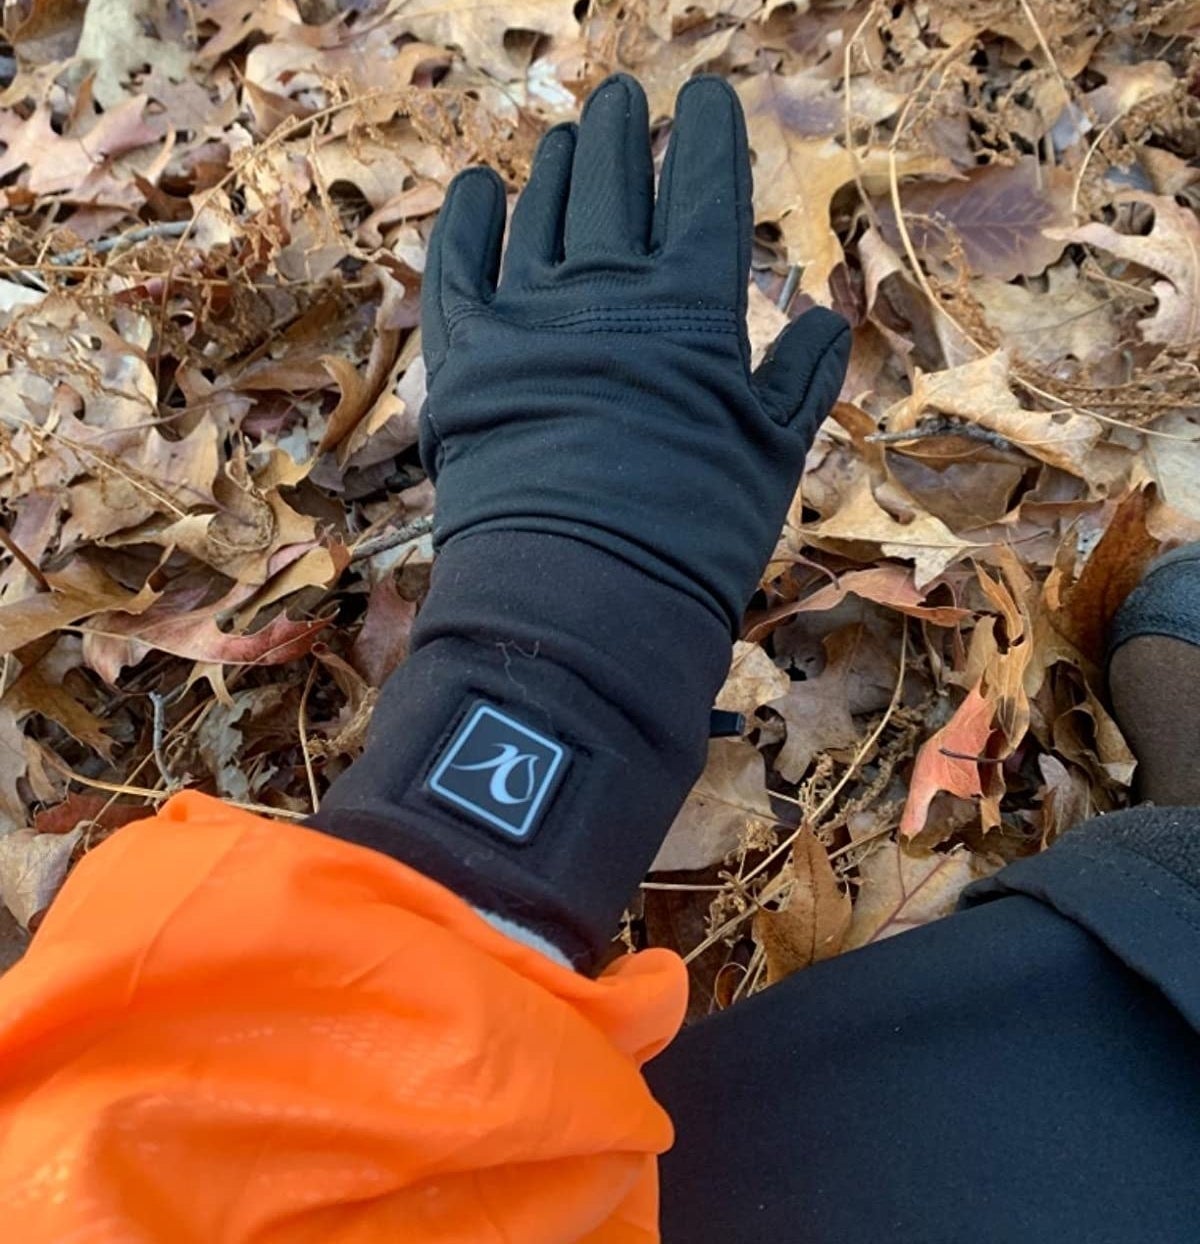 Reviewer wearing the glove outside in front of leaf pile